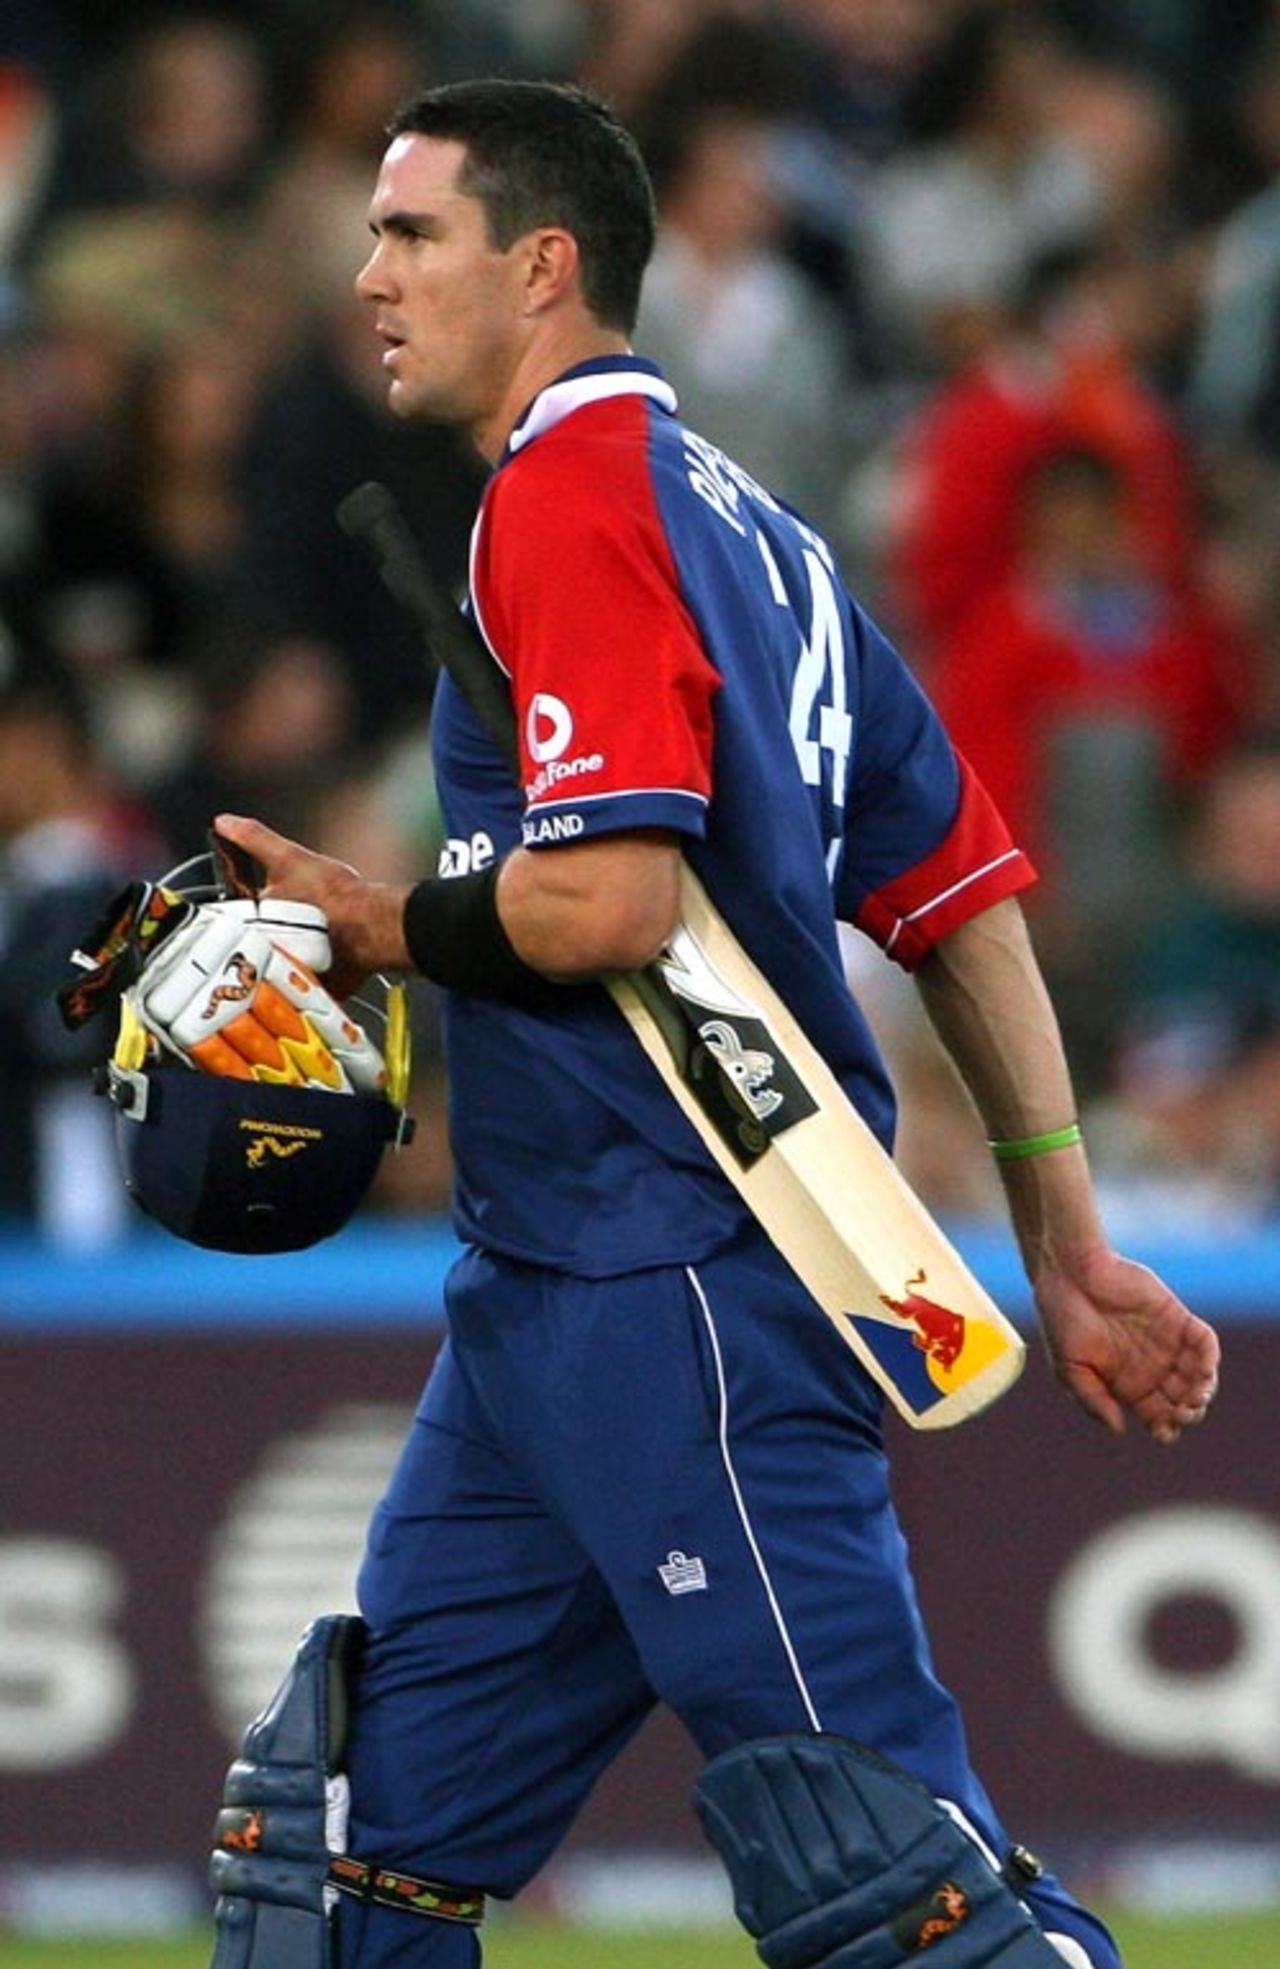 Kevin Pietersen walks back to the pavilion after being dismissed for 18, England v India, 4th ODI, Old Trafford, August 30, 2007
